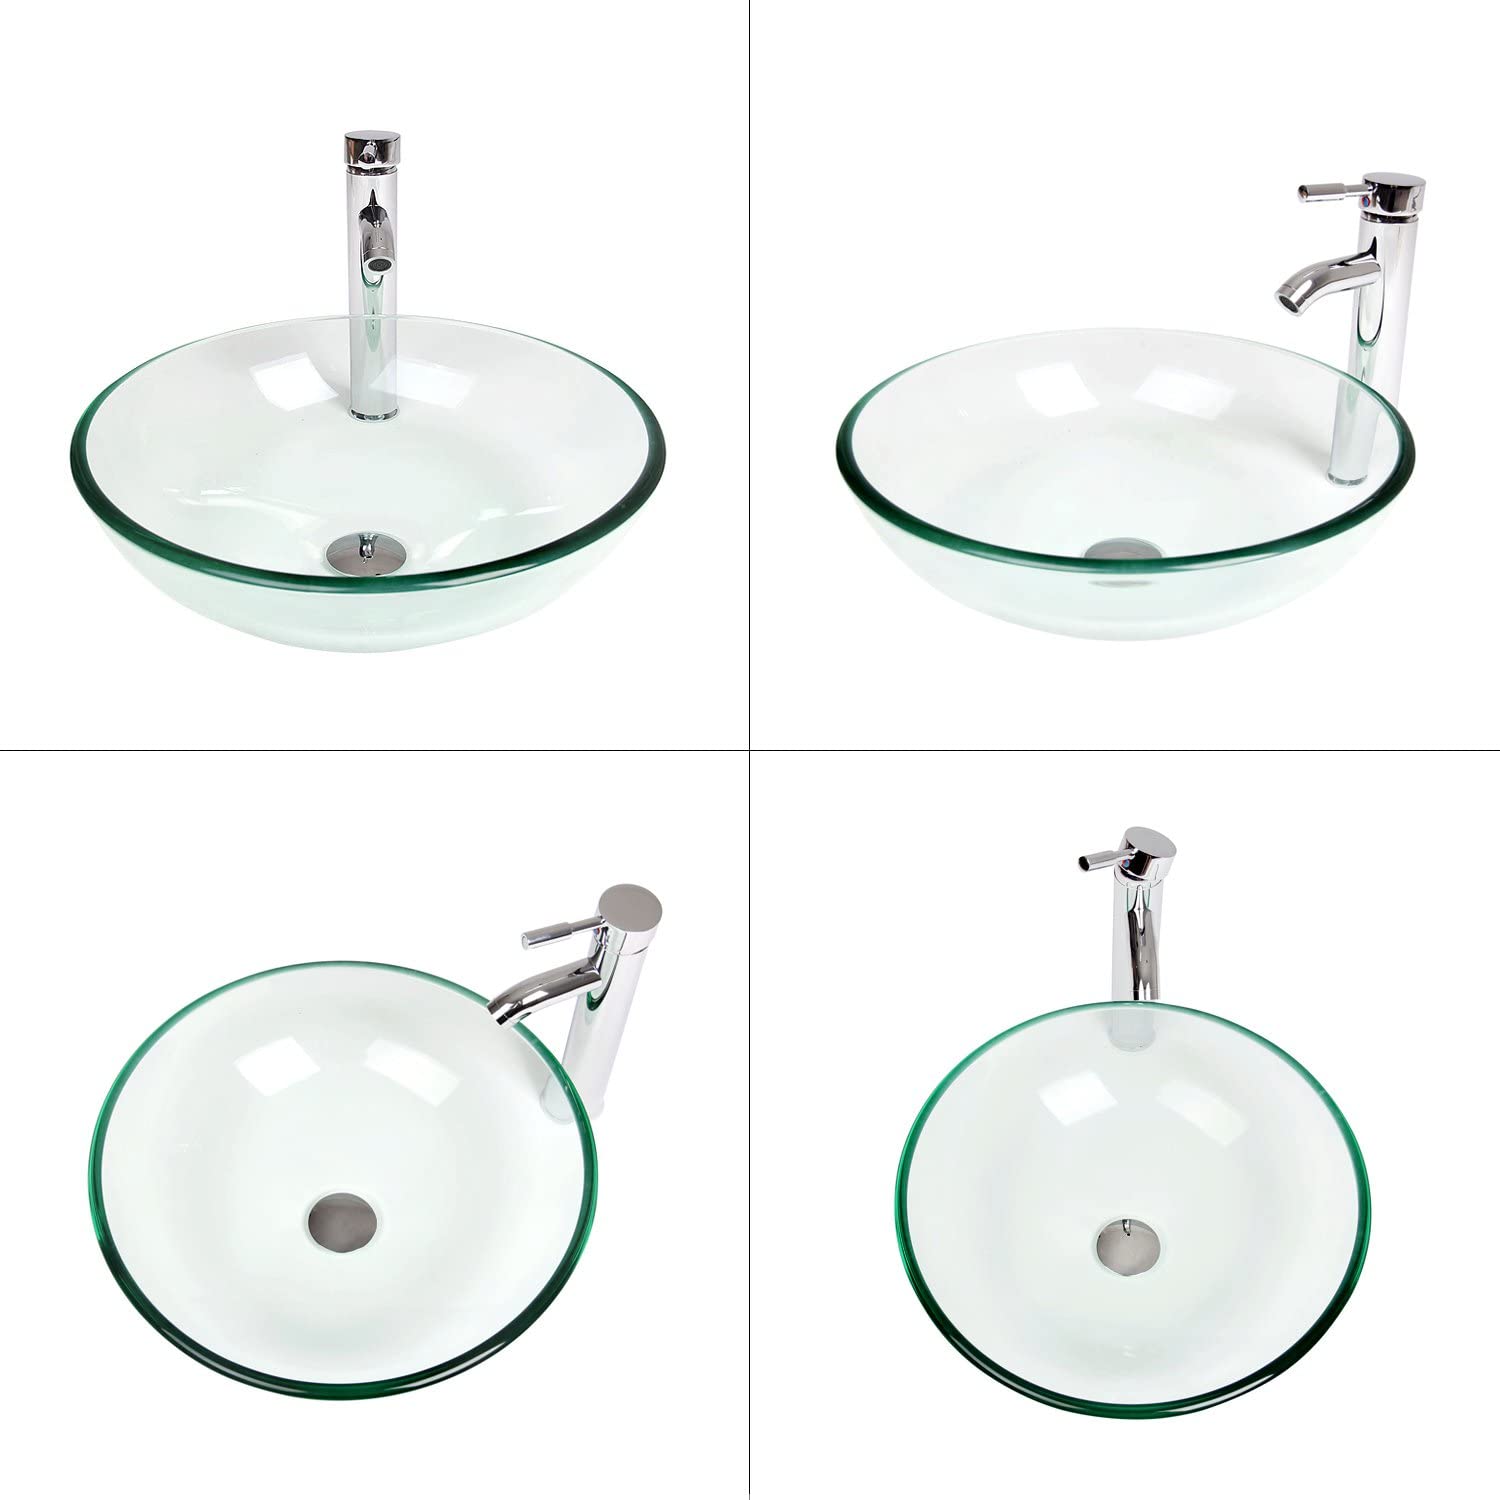 4 angles of Elecwish clear glass sink